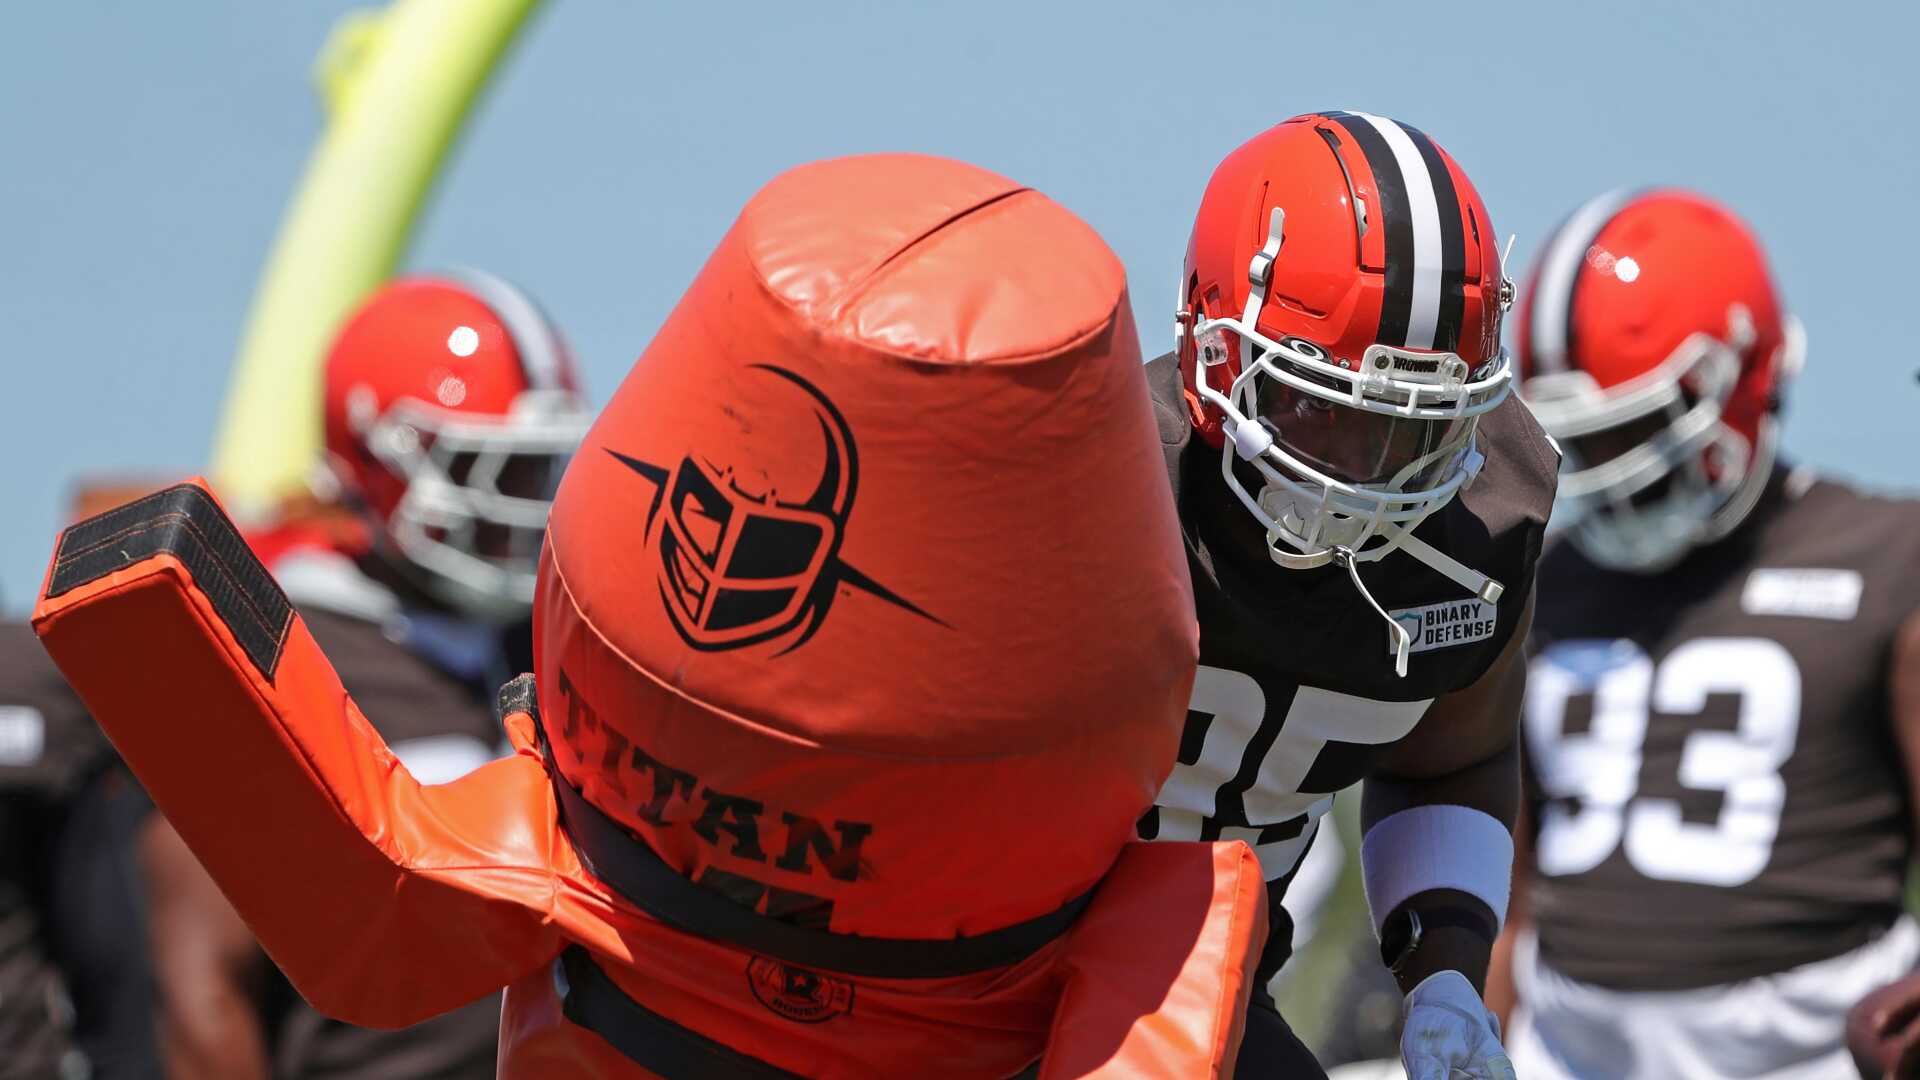 Myles Garrett practices for the first time in training camp